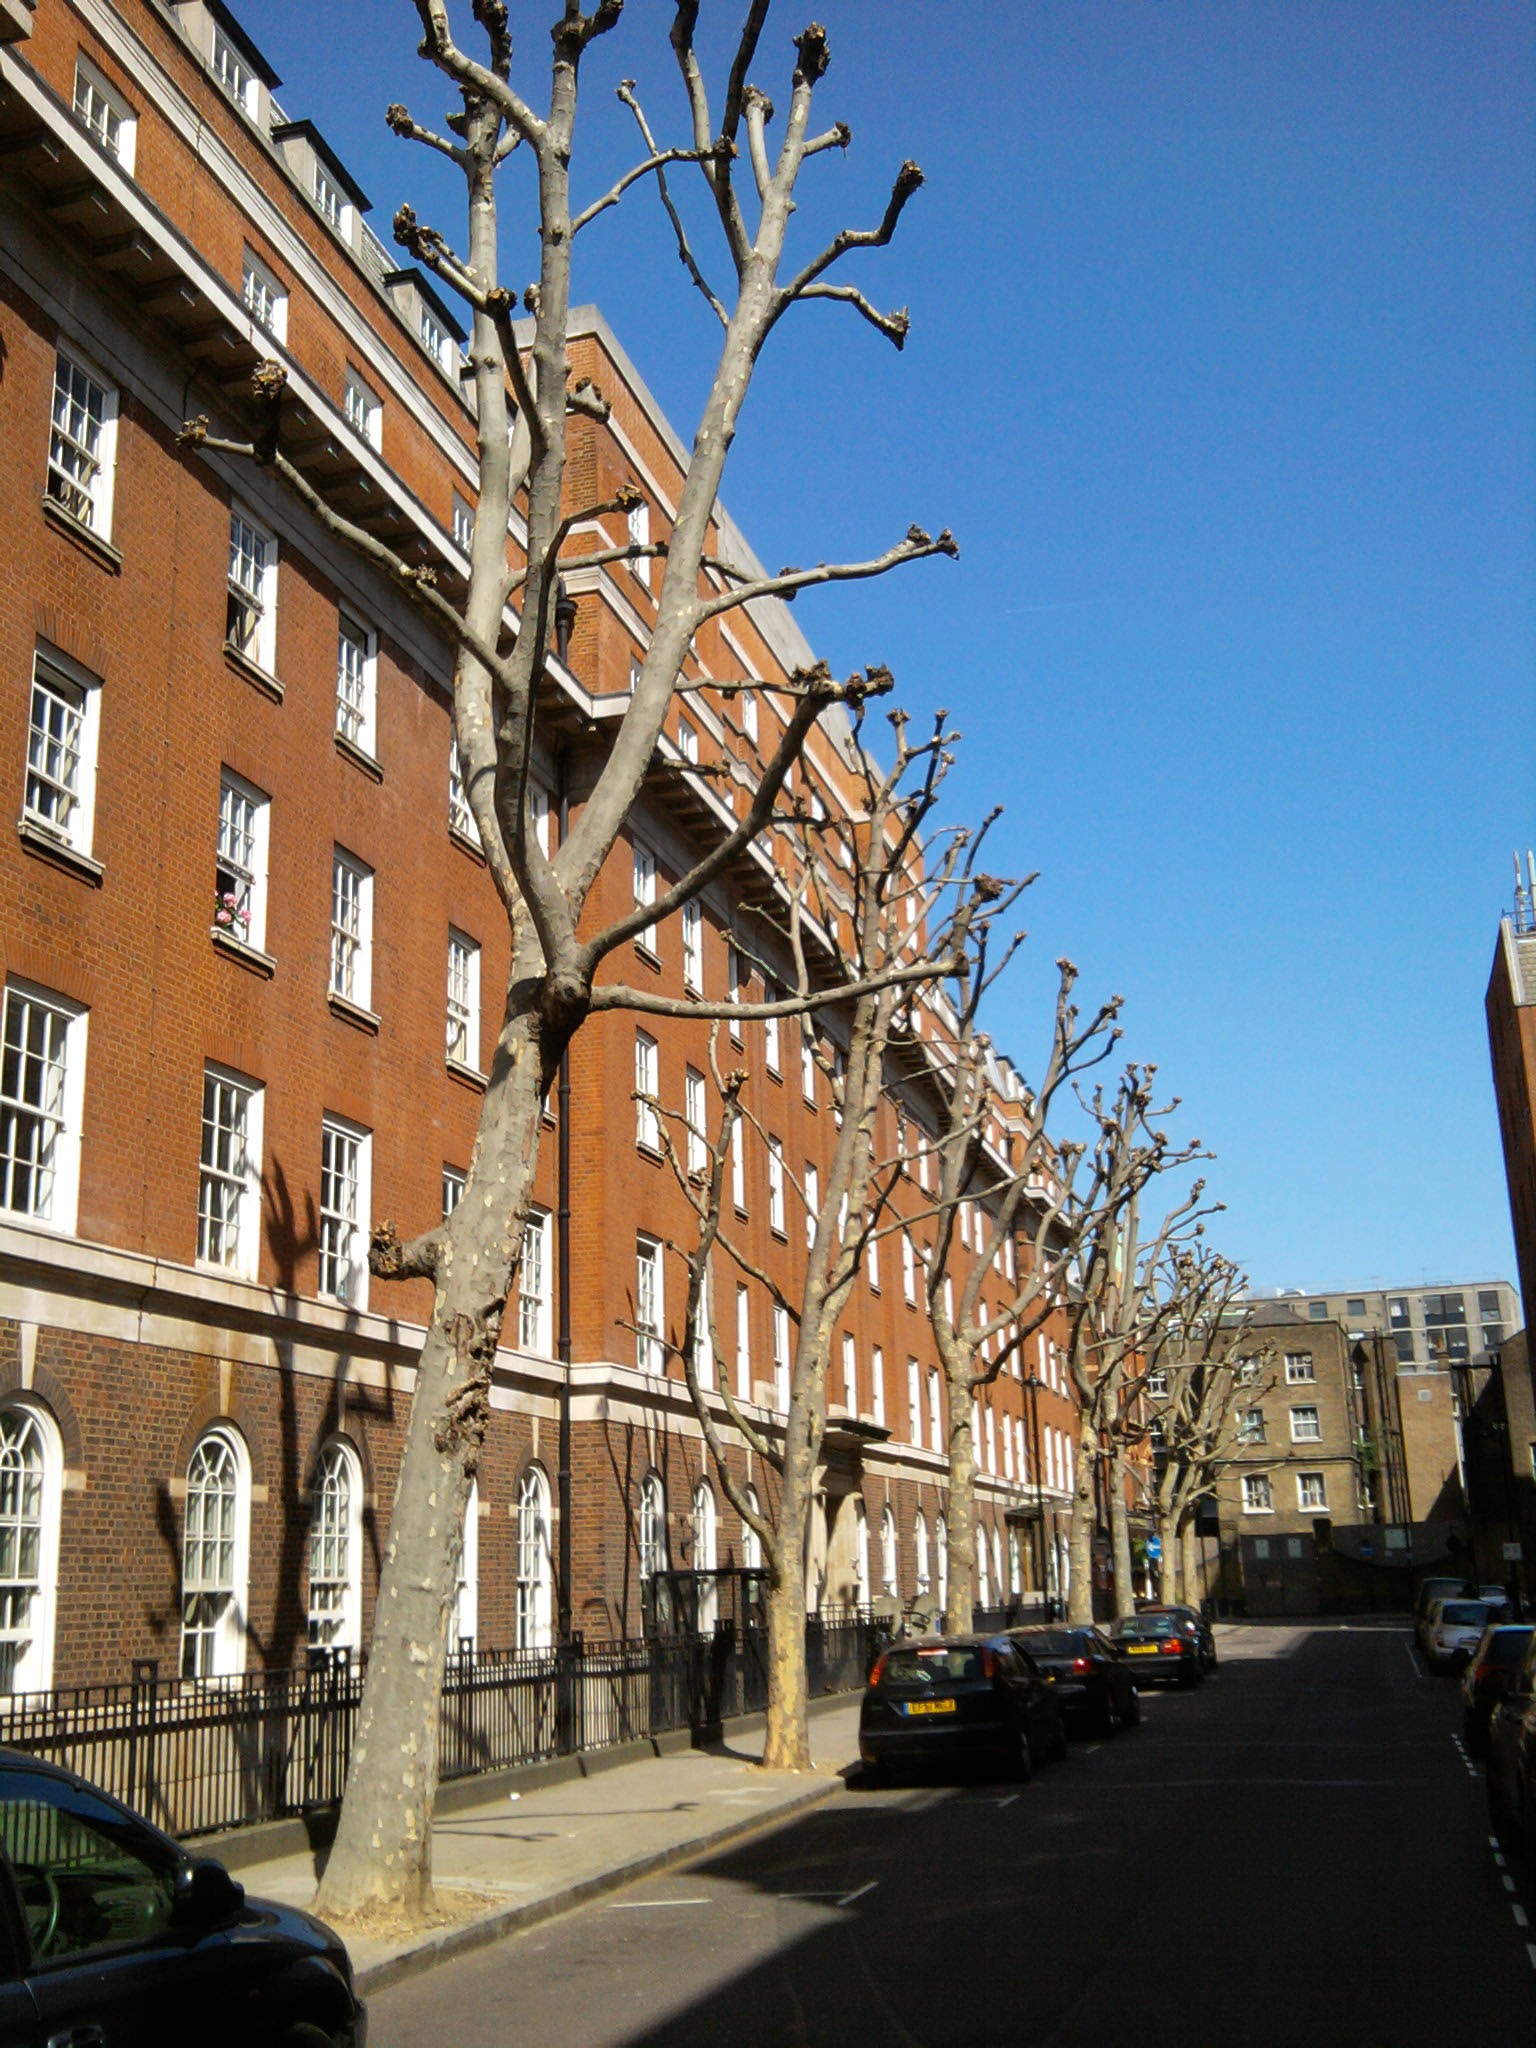 London Plane trees in Foley Street were pollarded during early April cutting off all the leaf growth